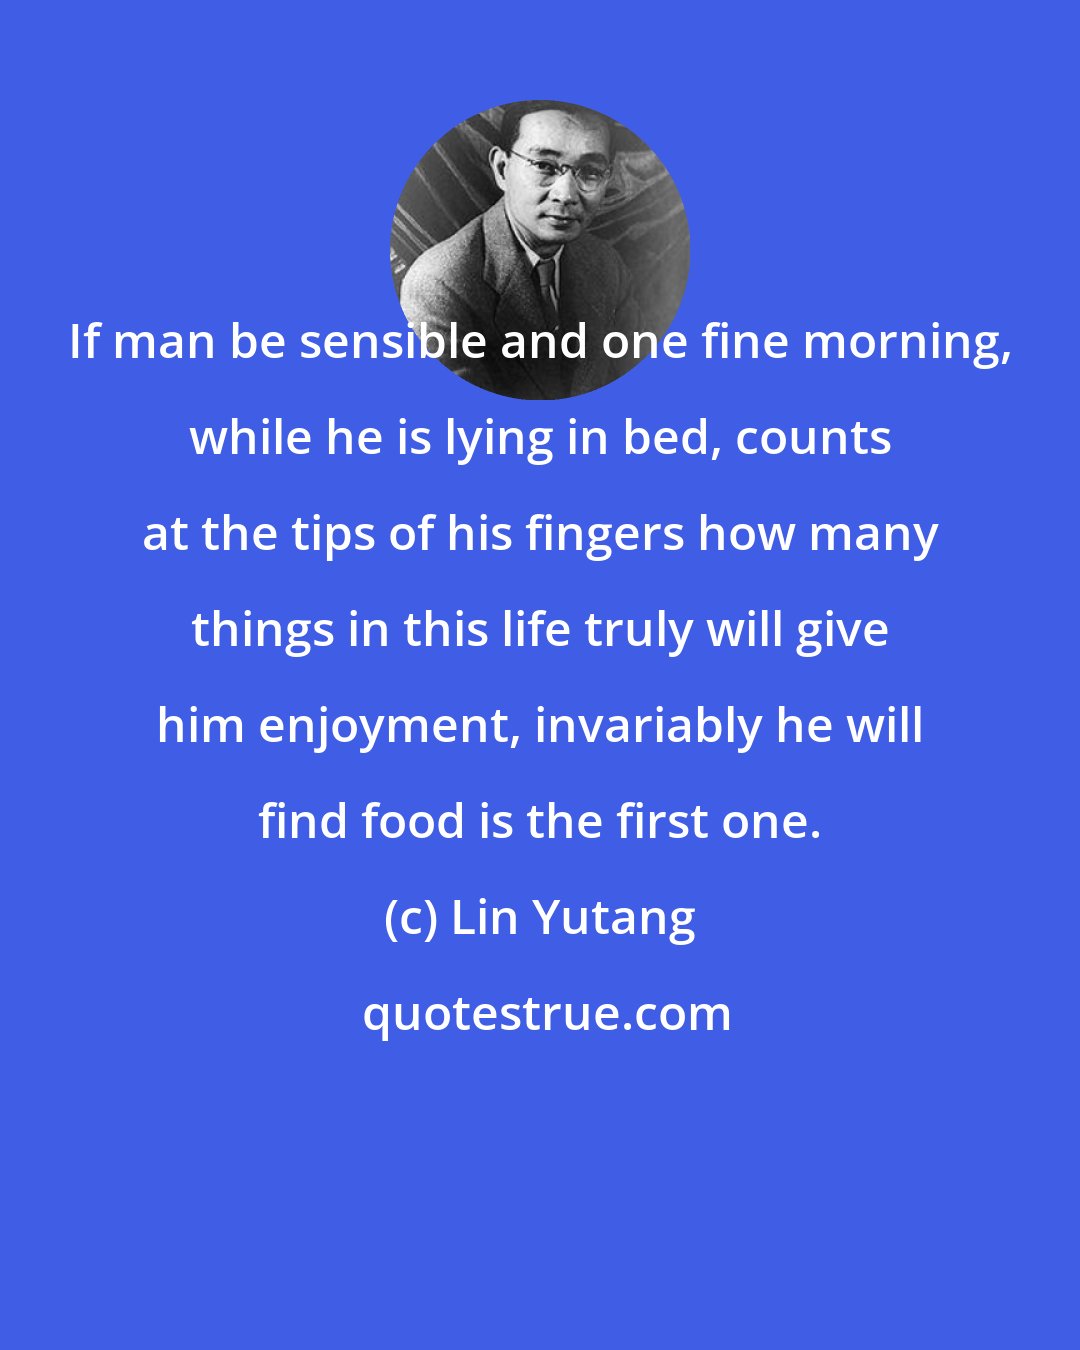 Lin Yutang: If man be sensible and one fine morning, while he is lying in bed, counts at the tips of his fingers how many things in this life truly will give him enjoyment, invariably he will find food is the first one.